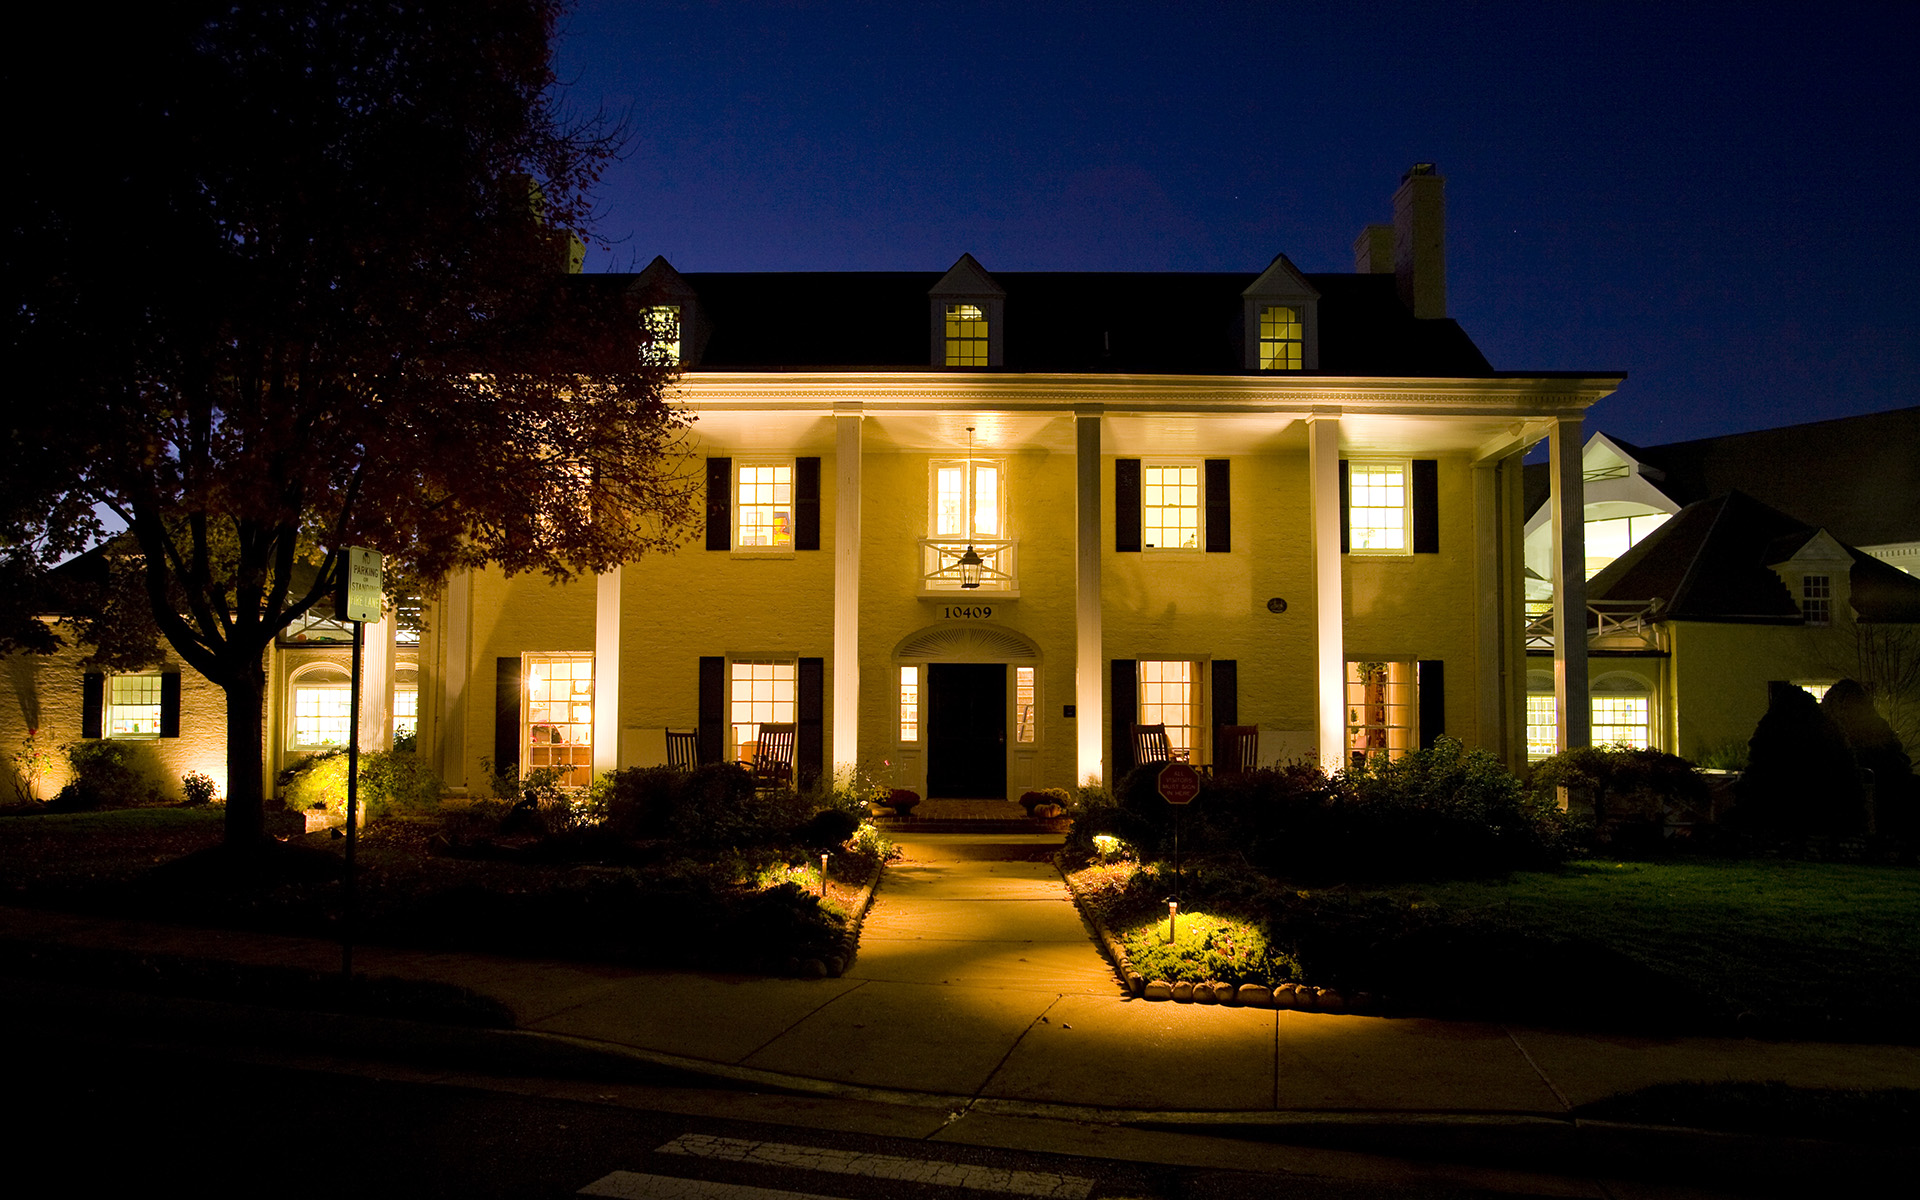 Miller House at nightWS